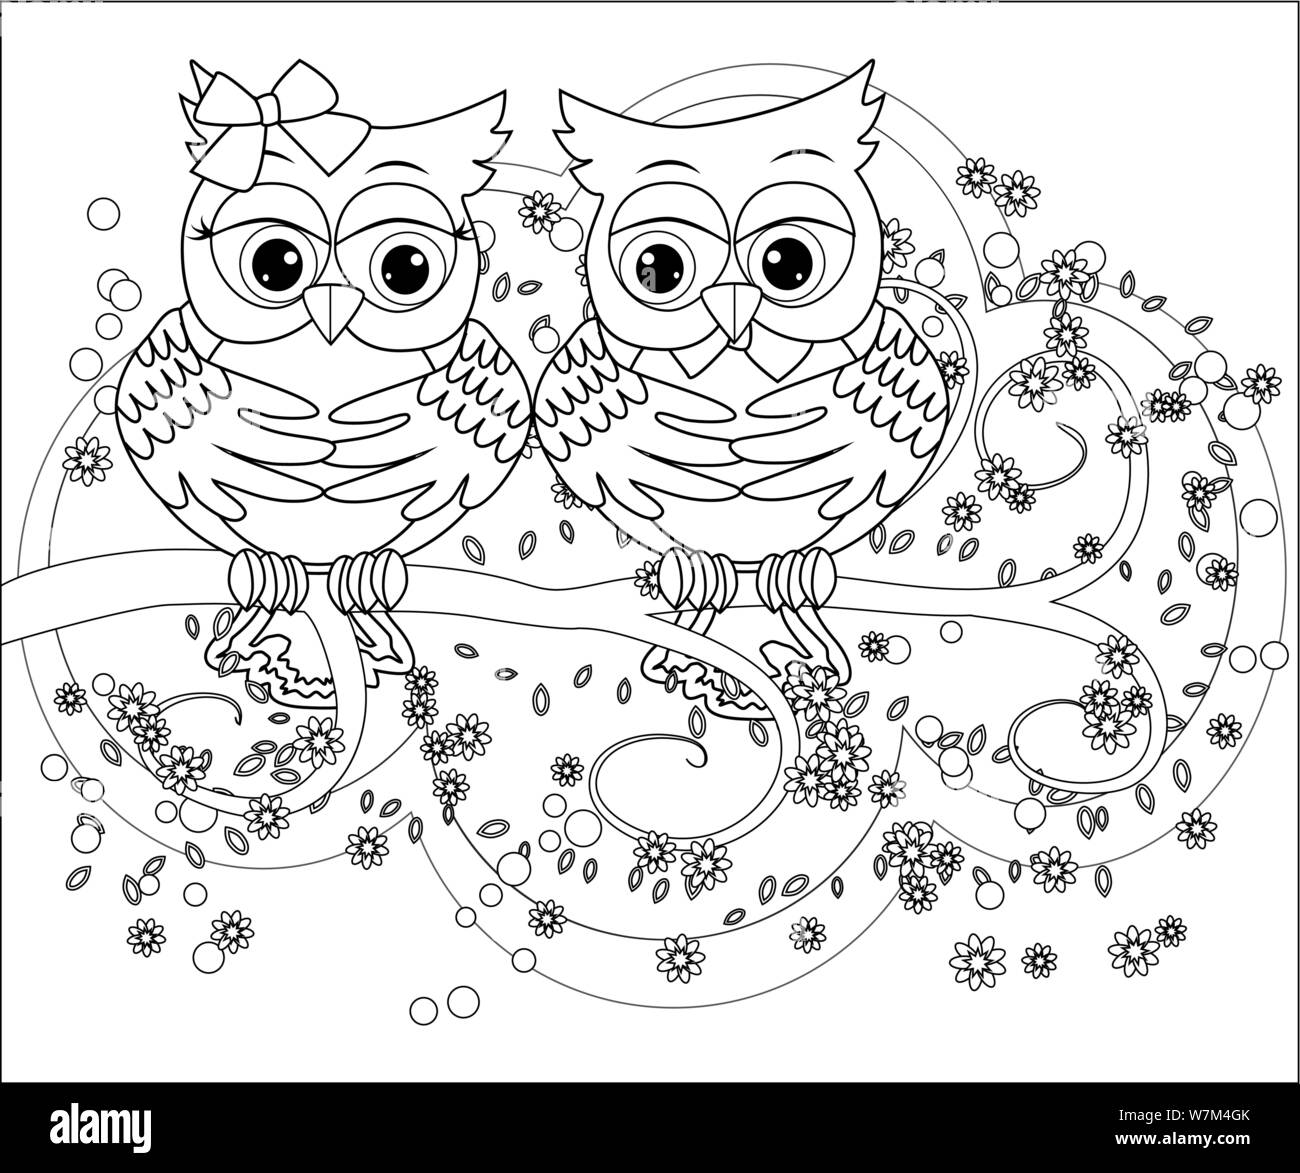 Coloring book for adult and older children. Coloring page with ...